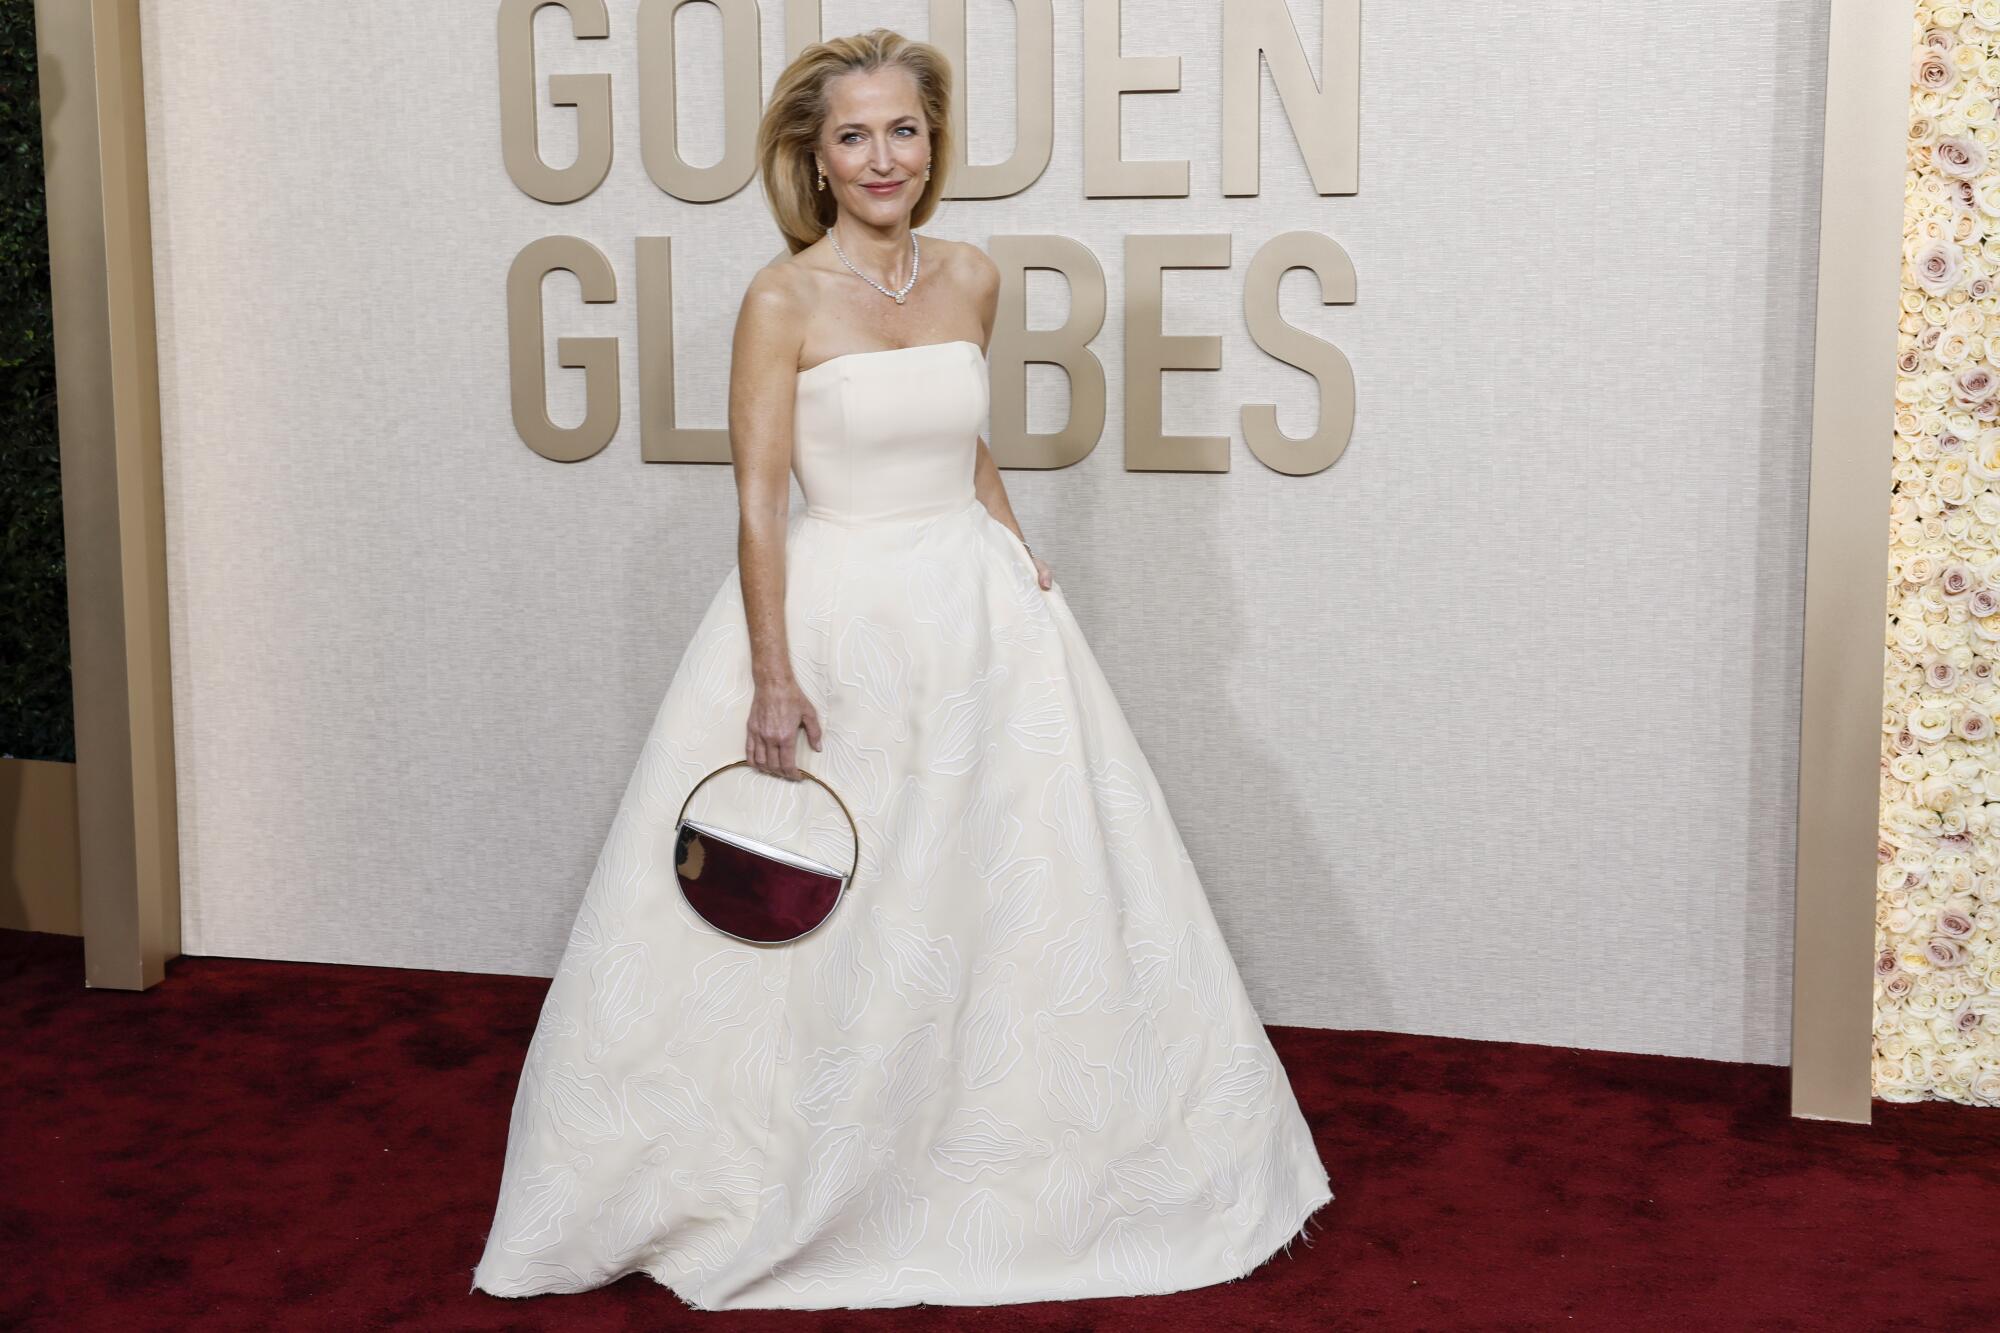 Gillian Anderson attends the 81st Golden Globe Awards held at the Beverly Hilton 